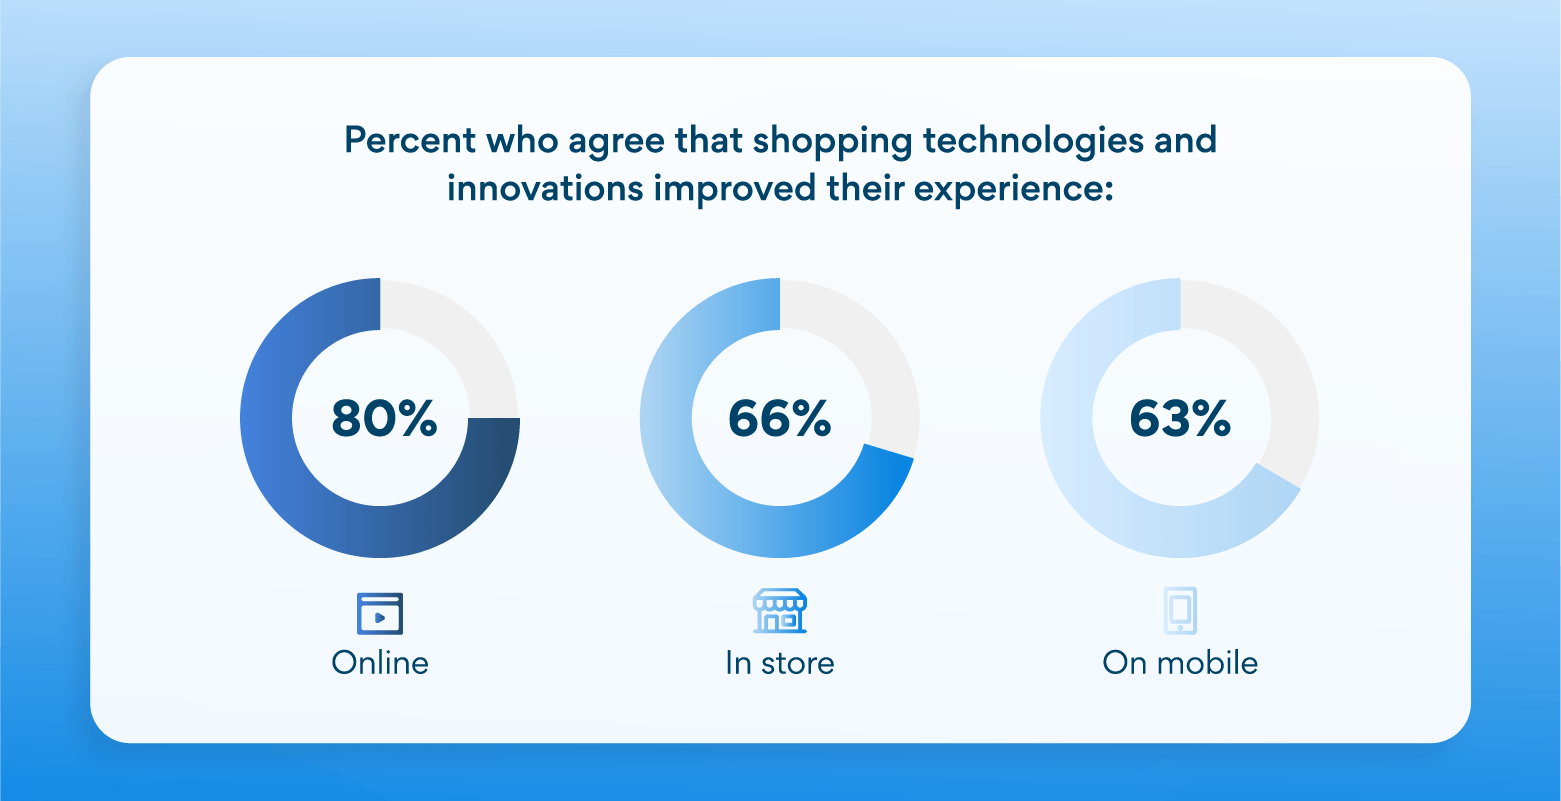 graph showing percentage of people who agree that shopping technologies and innovations improved their experience online, in store and on mobile